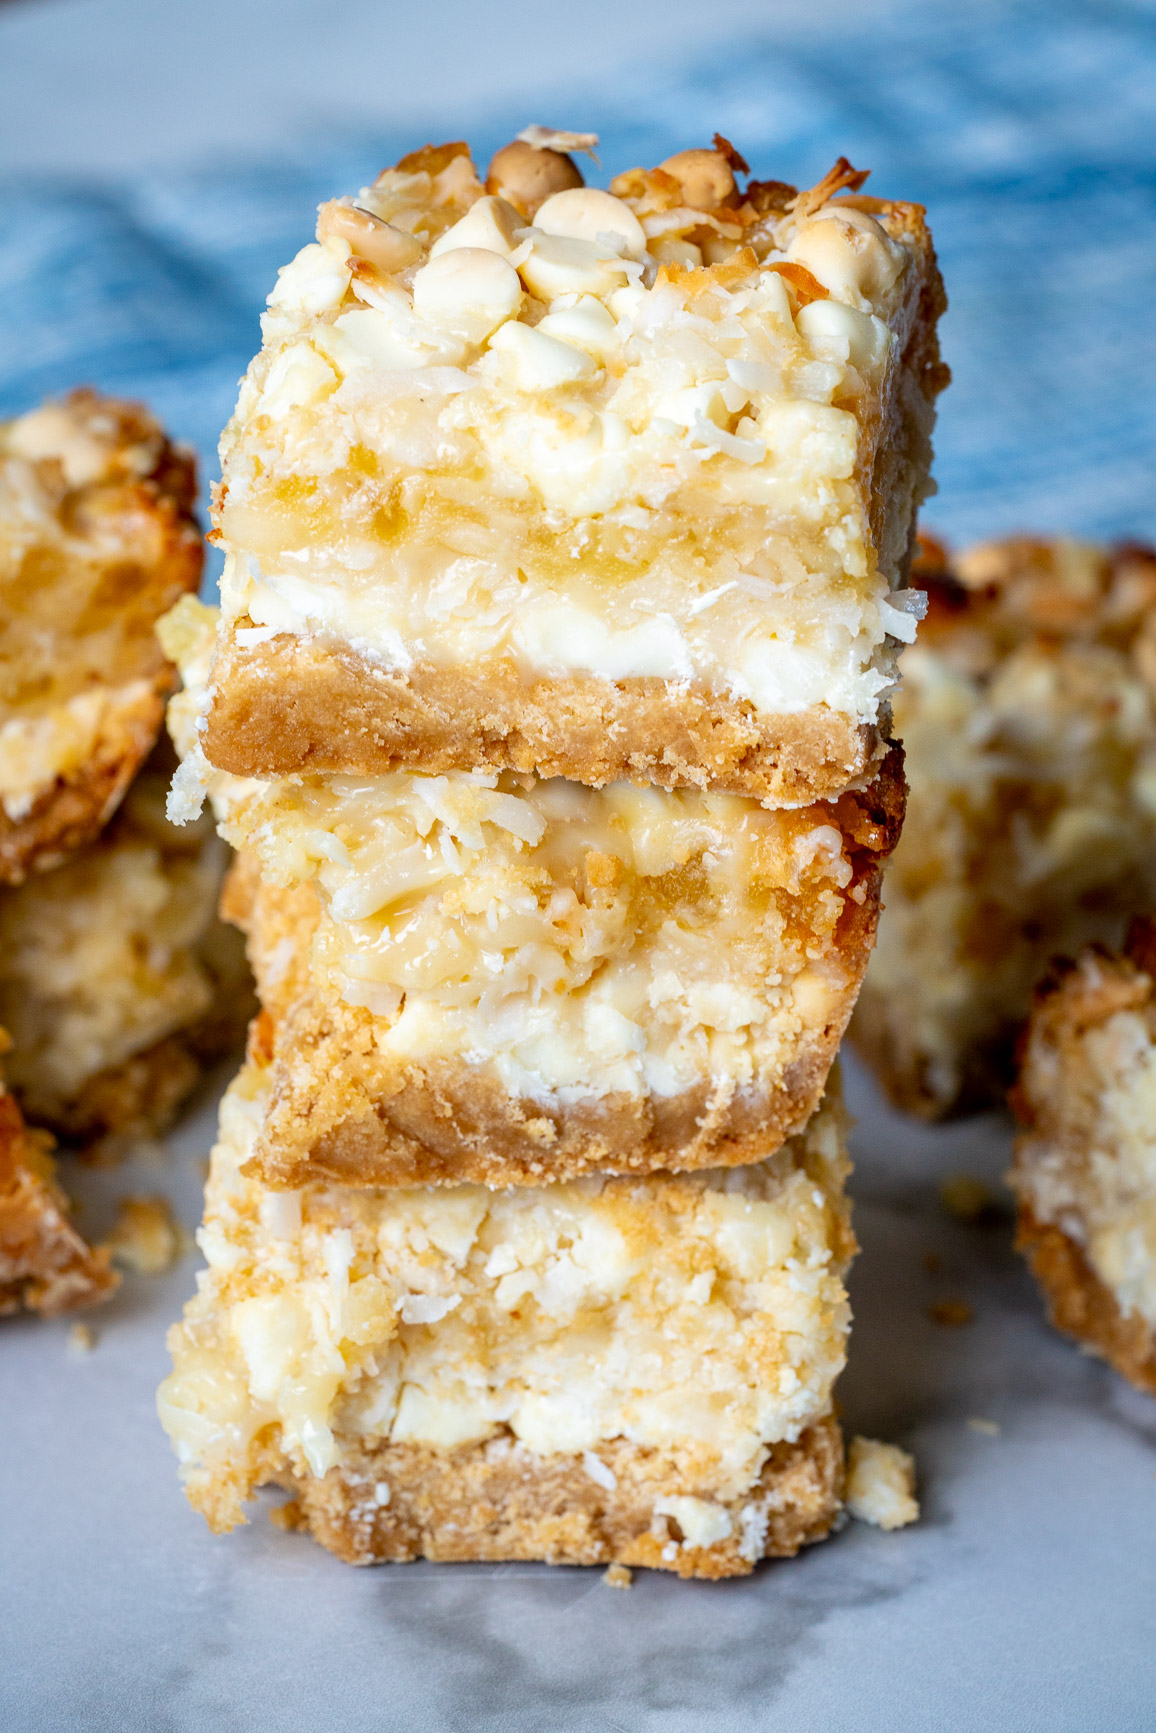 Tropical coconut and pineapple bars